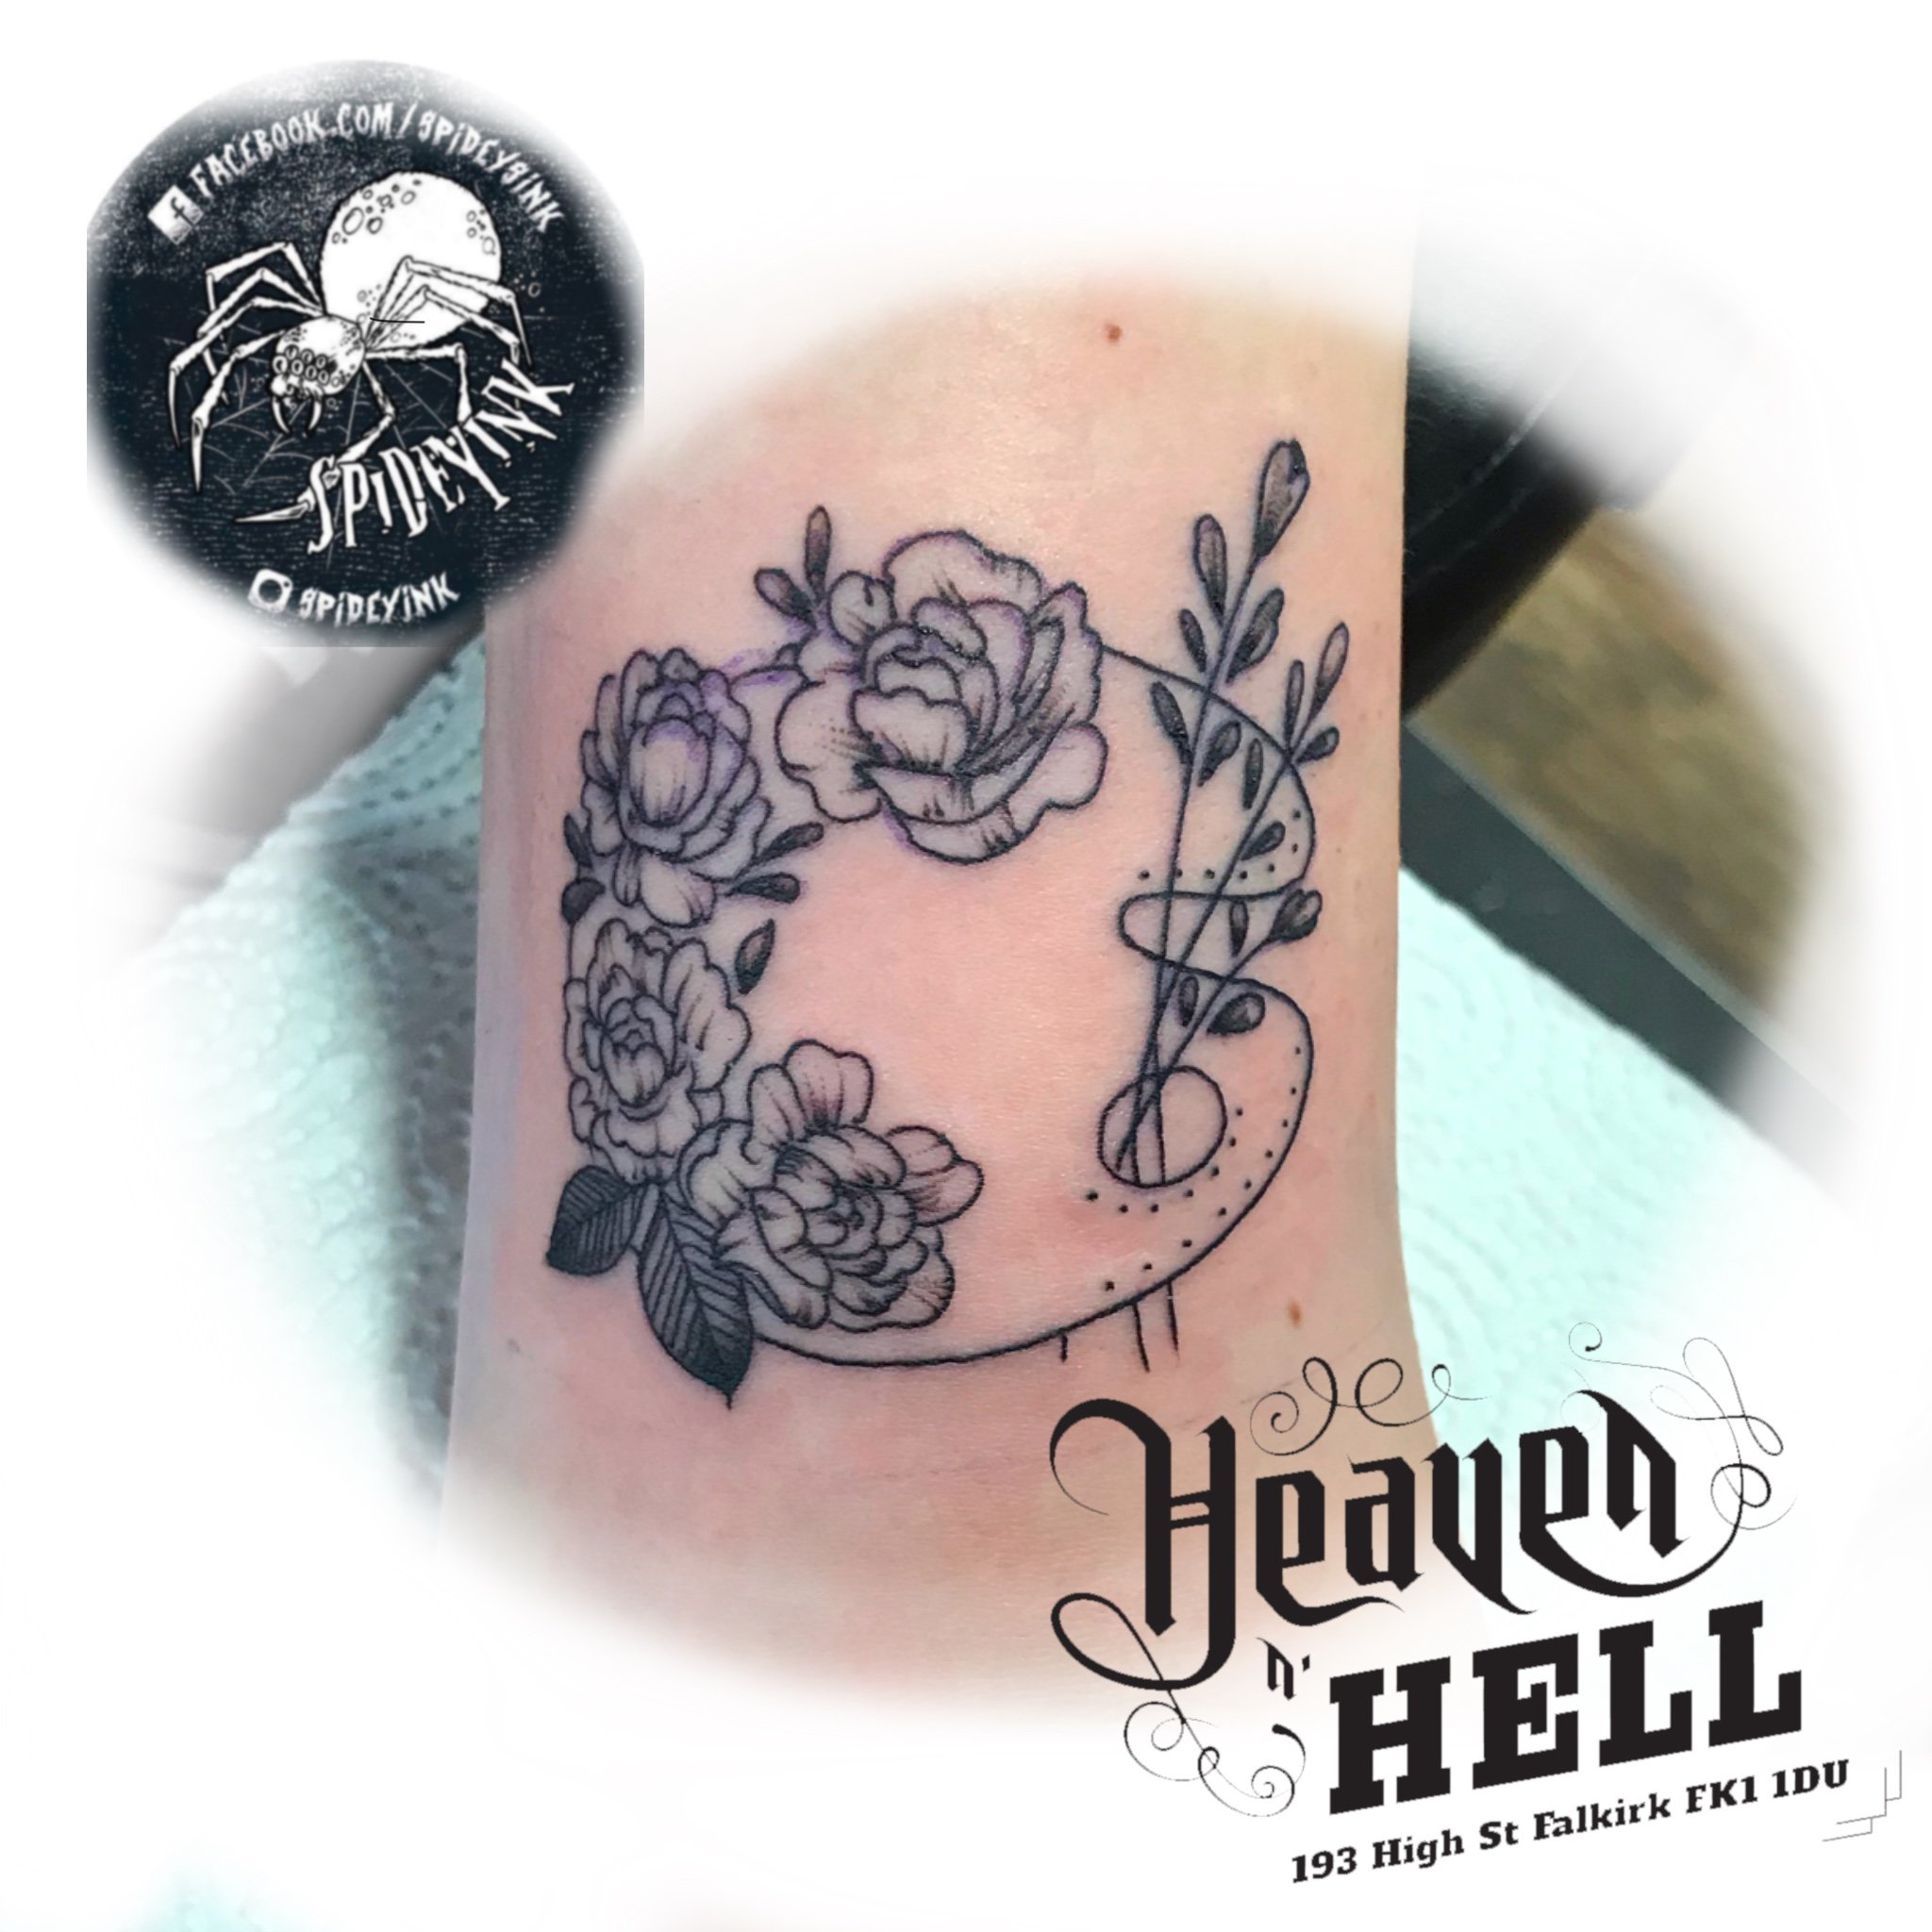 79 Extremely Creative Tattoo Drawings to Try at Home  Tattoo sleeve designs  Custom tattoo design Custom tattoo